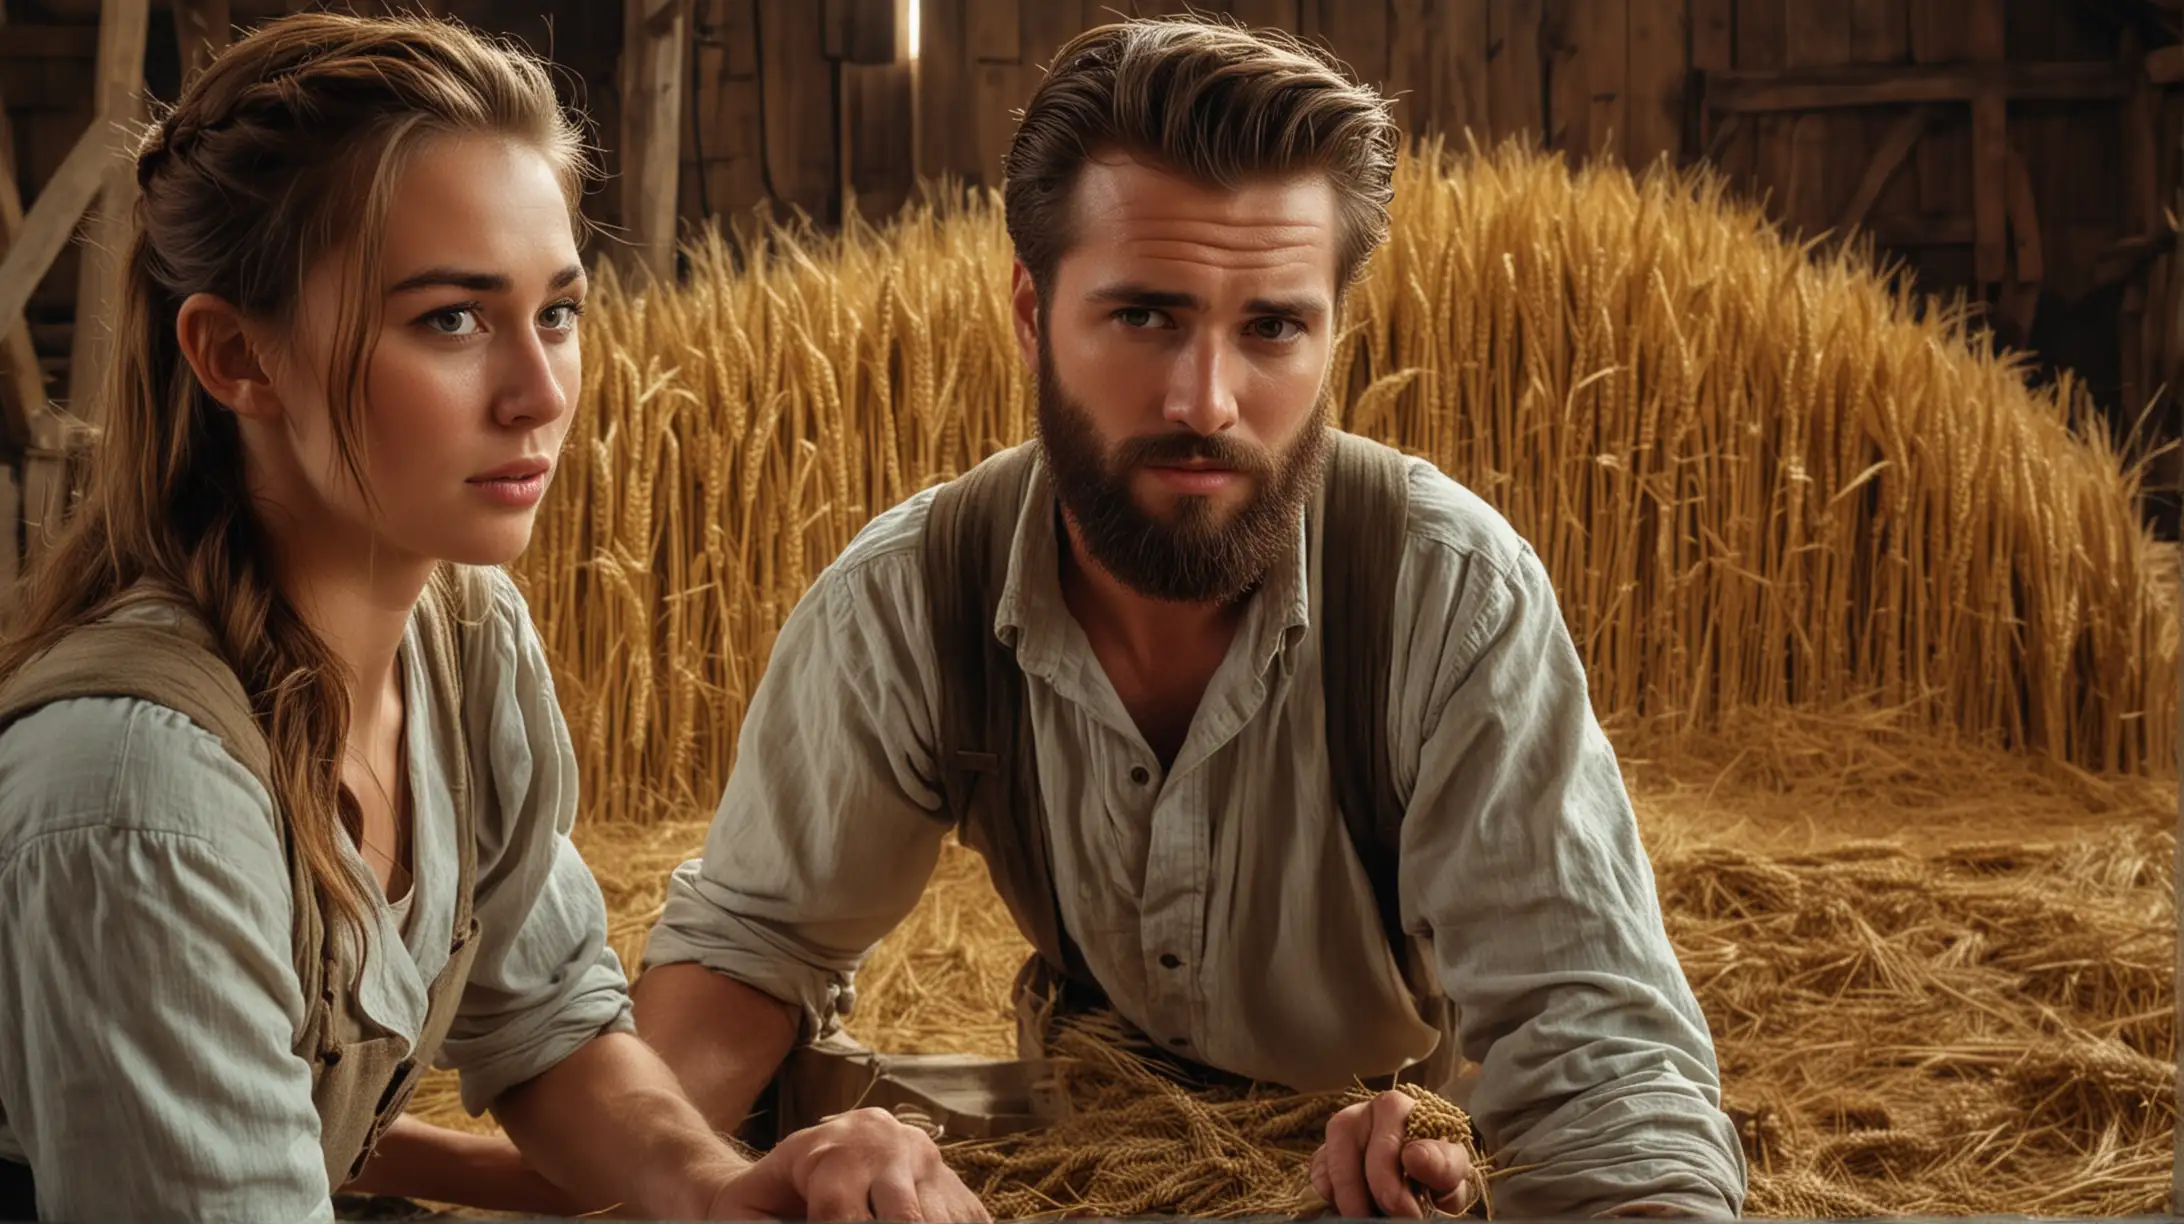 a Close-up of a handsome man with a beard threshing the wheat on a barn floor.  And in the background an attractive young woman sitting down watching him. Set during the biblical era of Moses